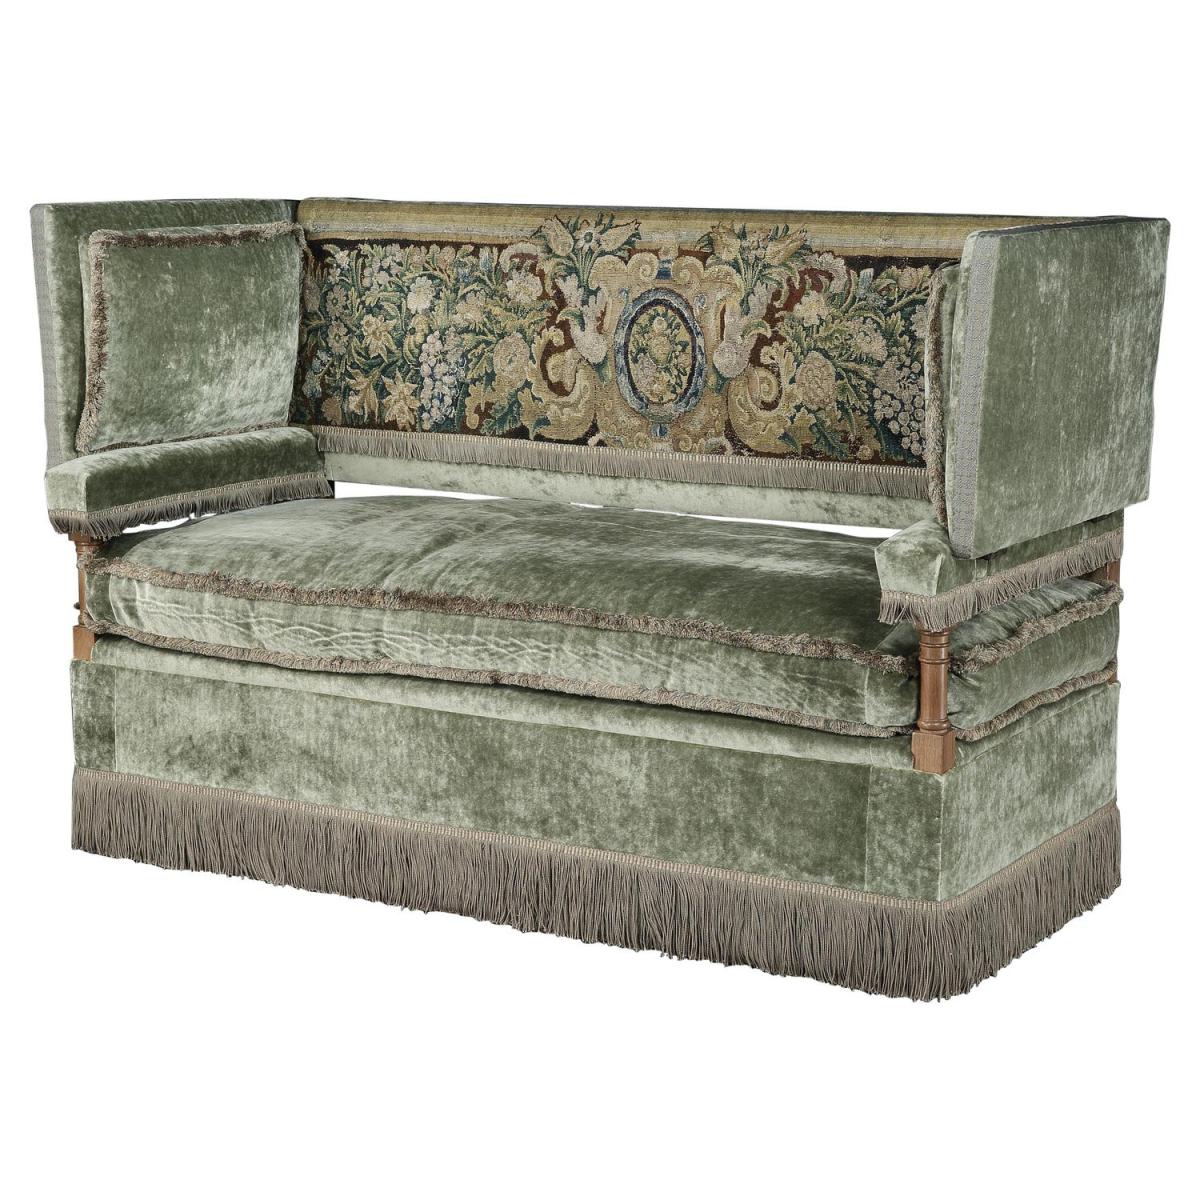 Knole Settee, Cowdray Park, English, Lengyon & Co, olive velvet, tapestry